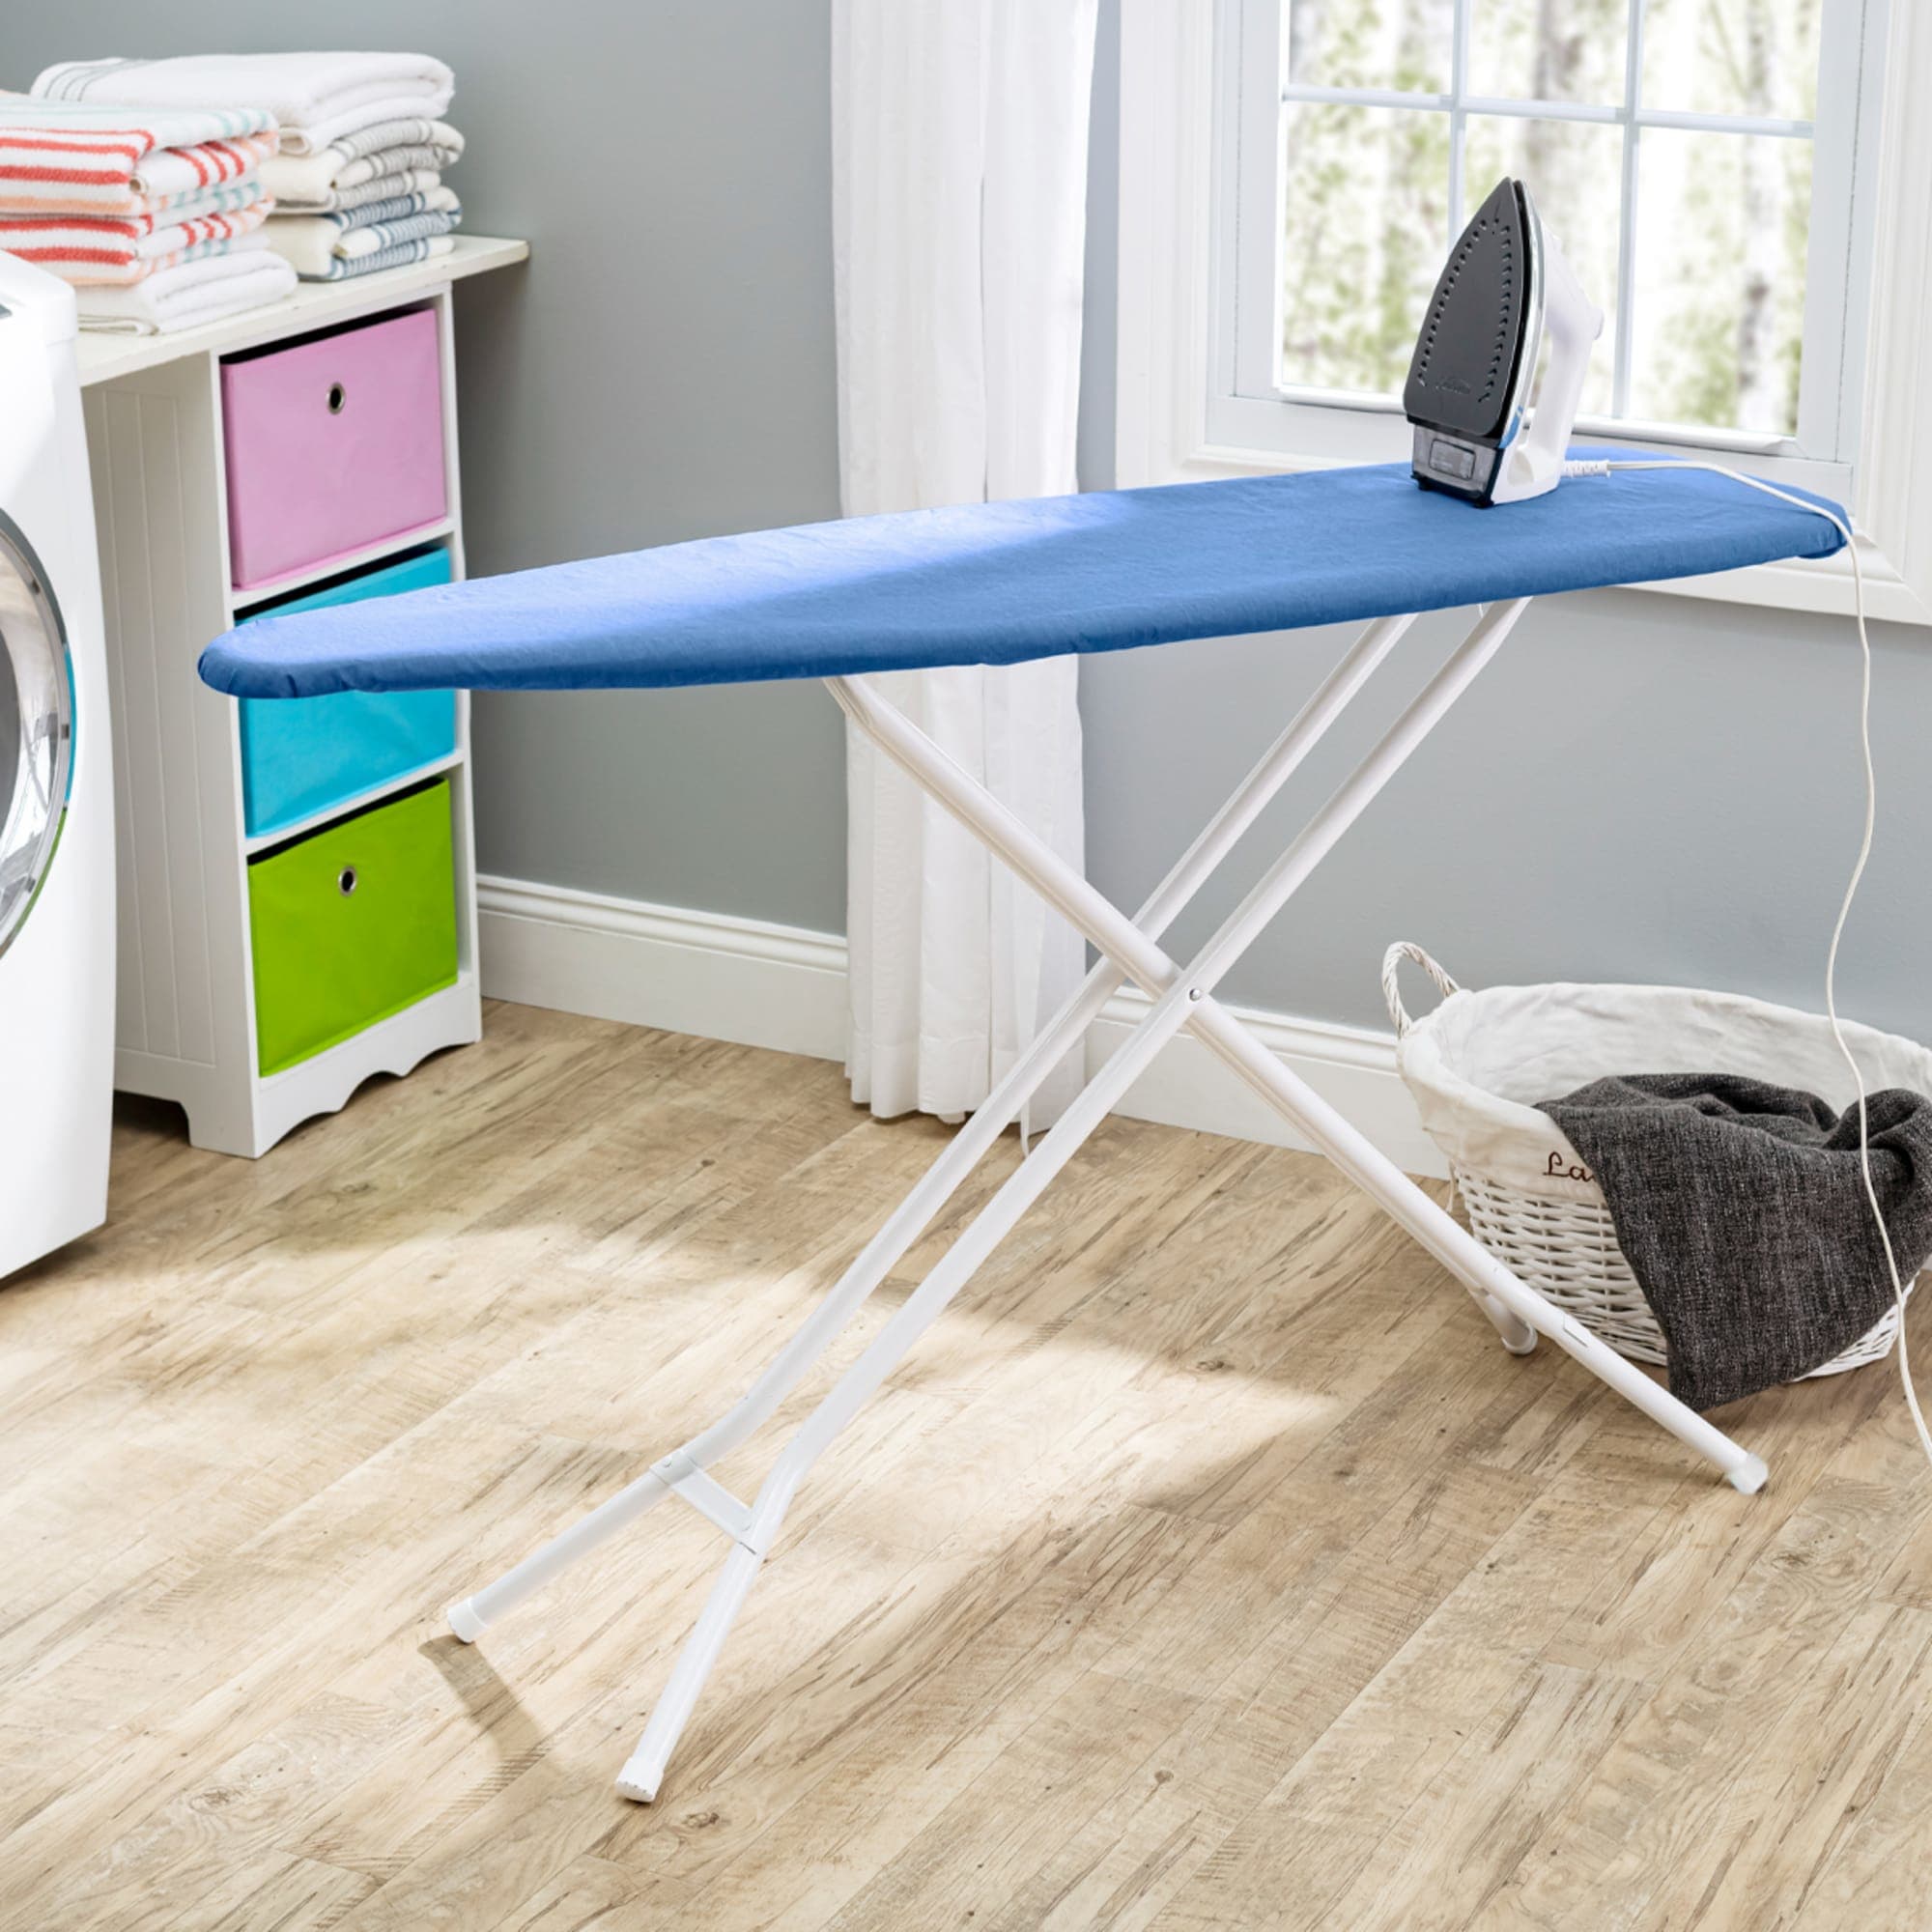 Seymour Home Products Adjustable Height, 4-Leg Ironing Board with Perforated Top, Dark Blue $30 EACH, CASE PACK OF 1